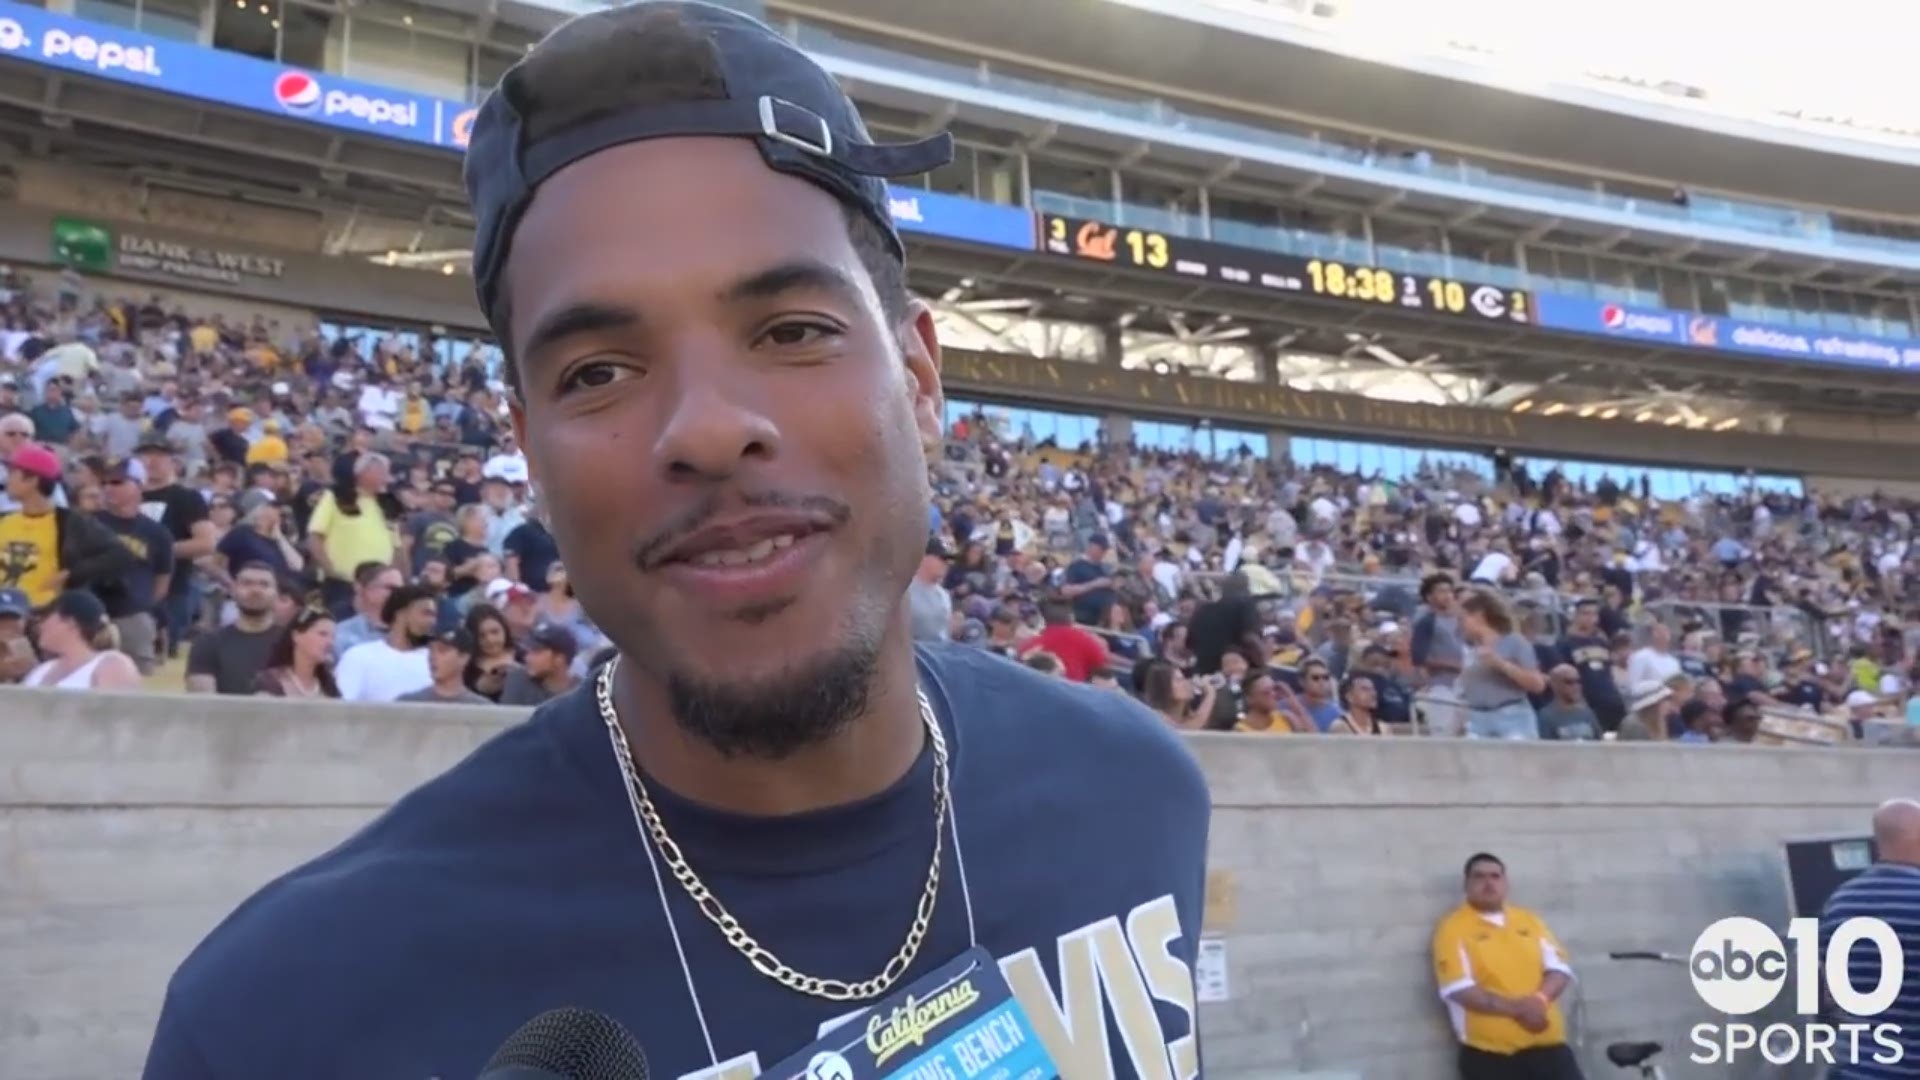 While attending the season opener at Cal in Berkeley, former UC Davis star receiver Keelan Doss talks to ABC10's Sean Cunningham about learning that he was released by the Oakland Raiders earlier in the day, what lies ahead for his future in the NFL and the experience of being a big subject of the HBO series "Hard Knocks."